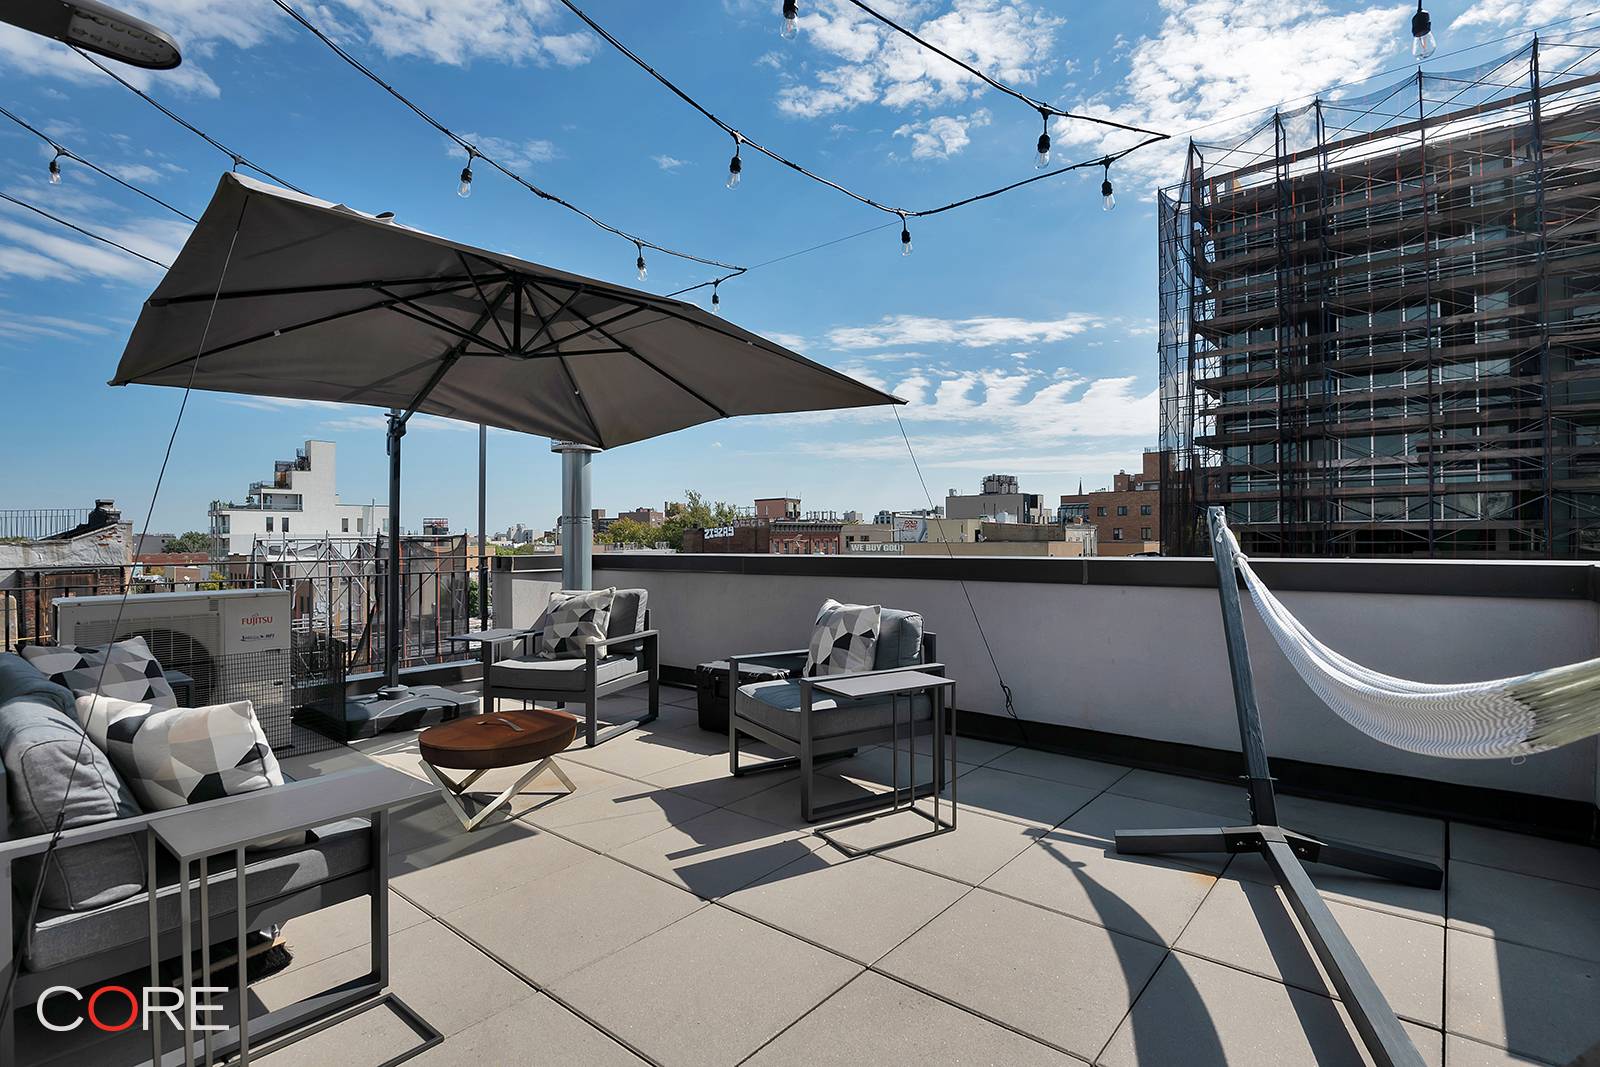 This stunning penthouse duplex features a tremendous private terrace and unobstructed views for days.